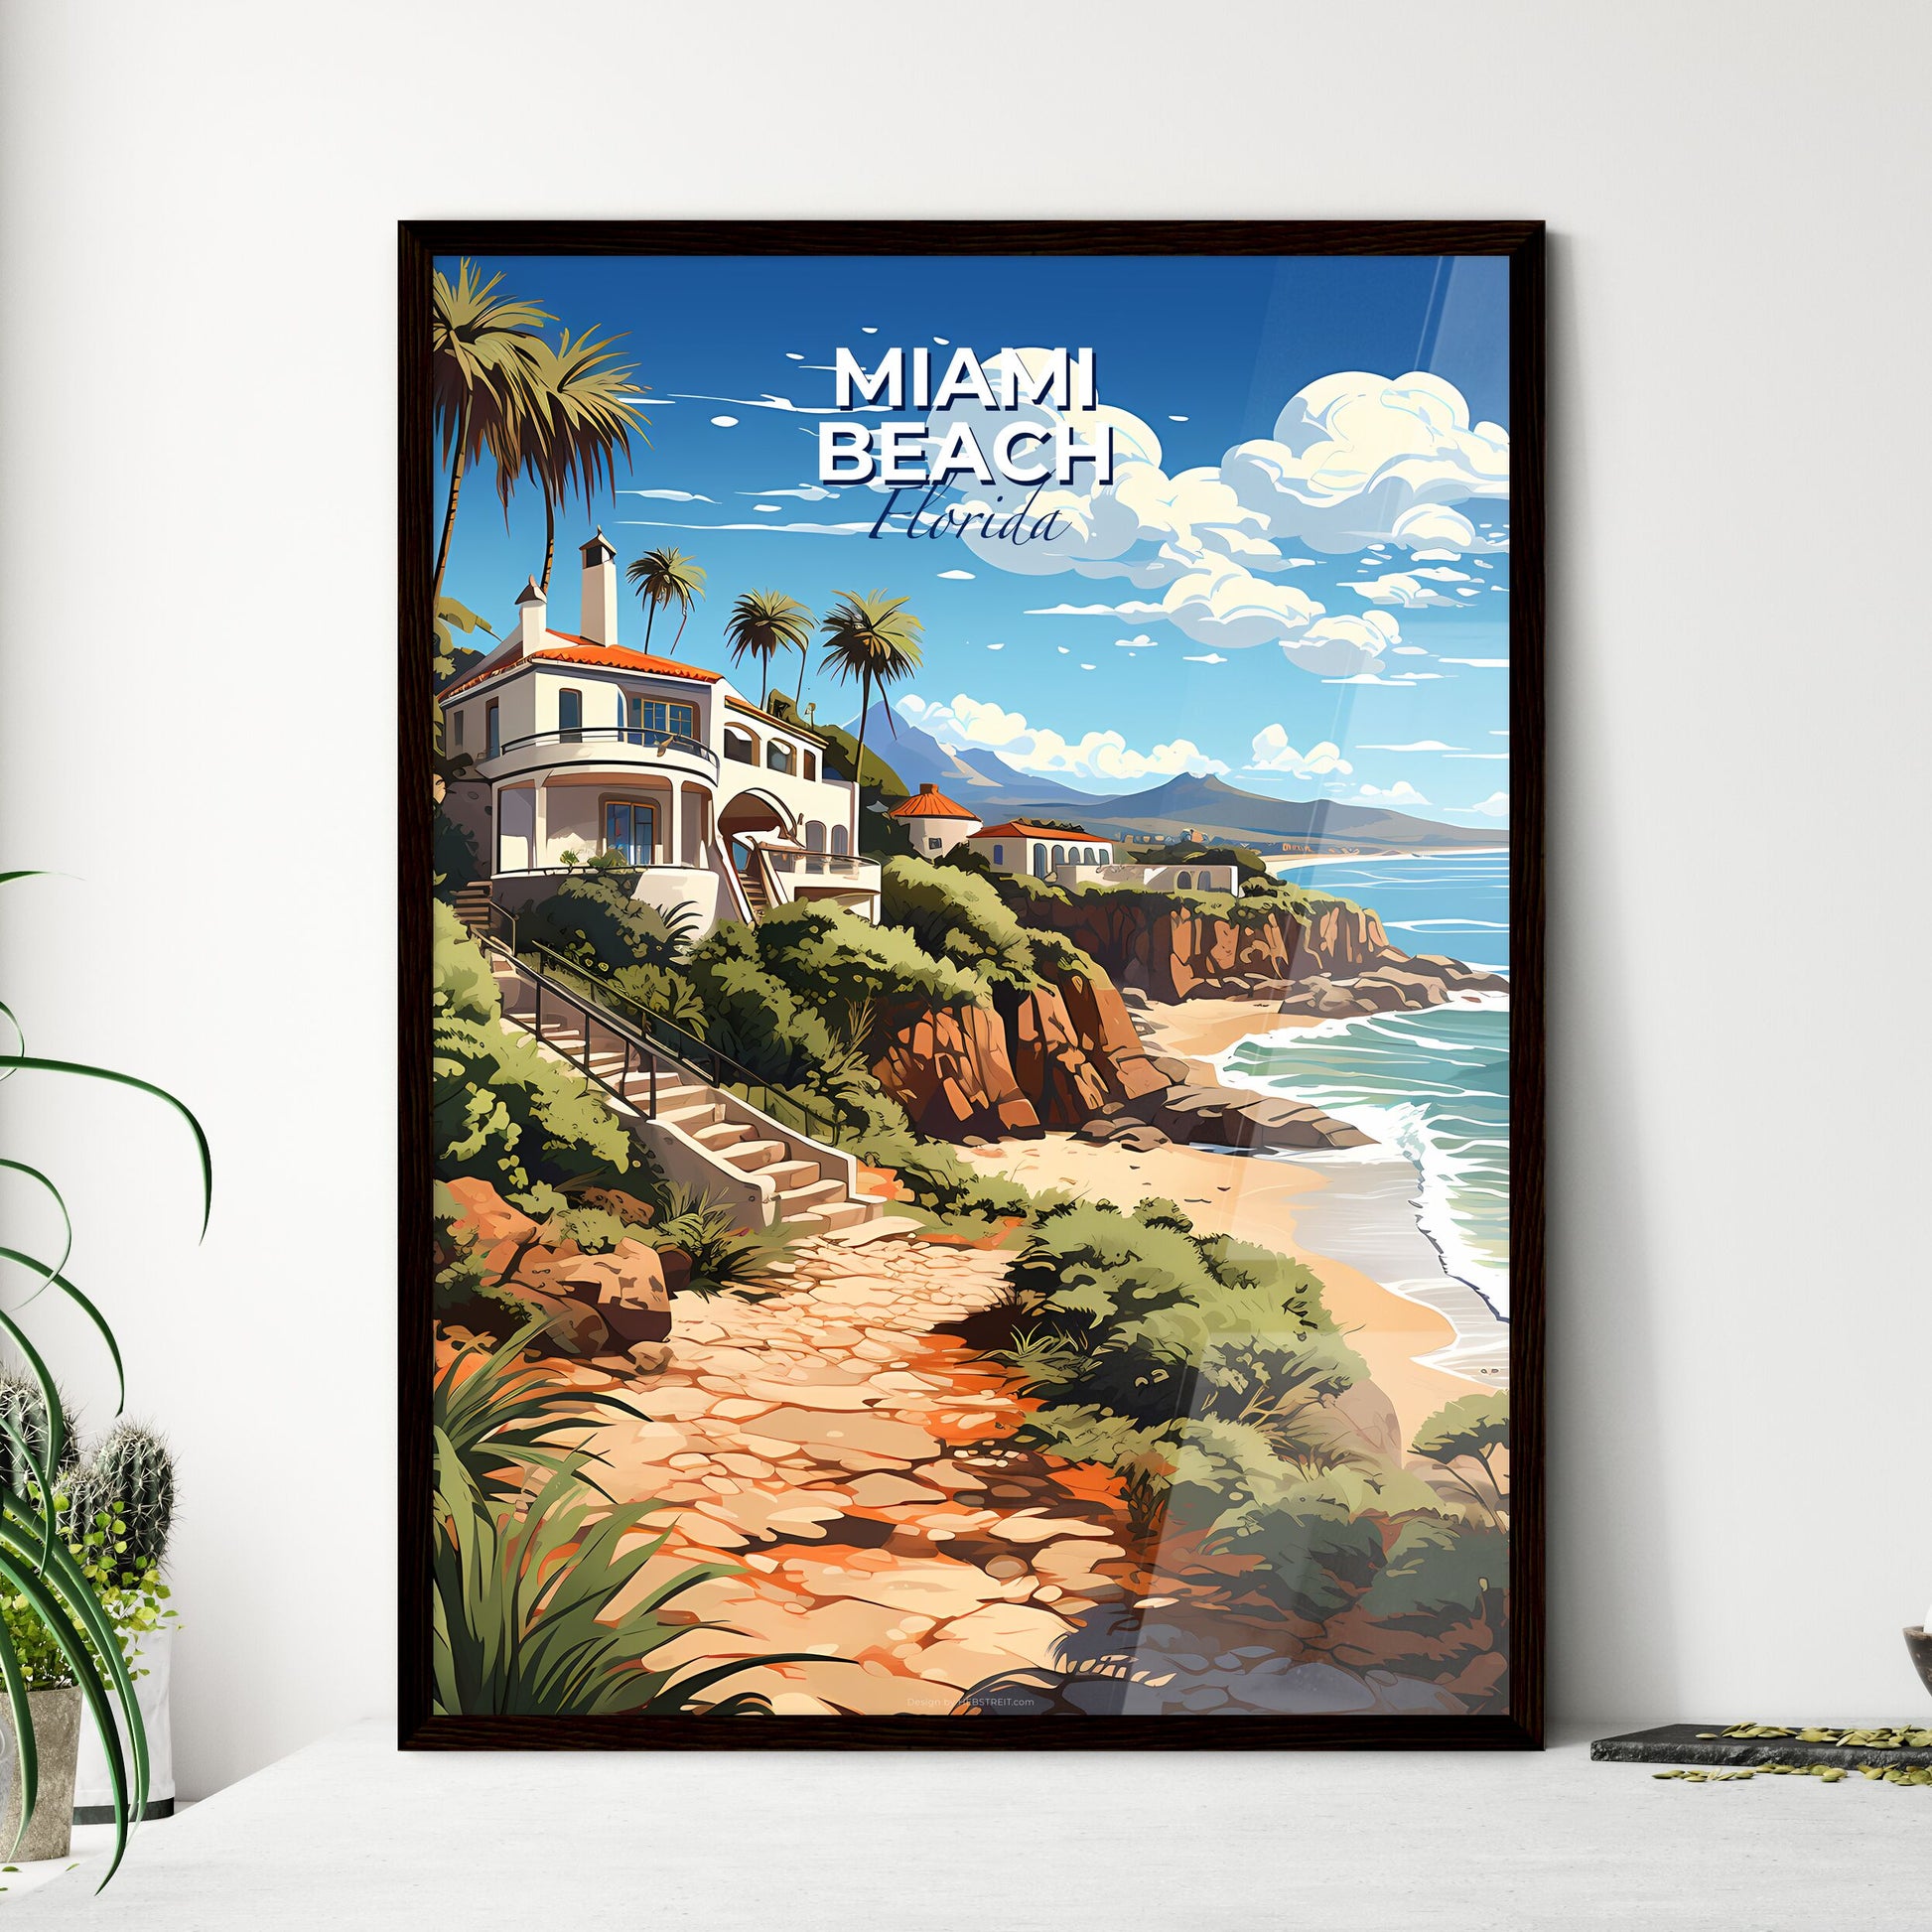 Miami Beach, Florida, A Poster of a house on a cliff by the ocean Default Title